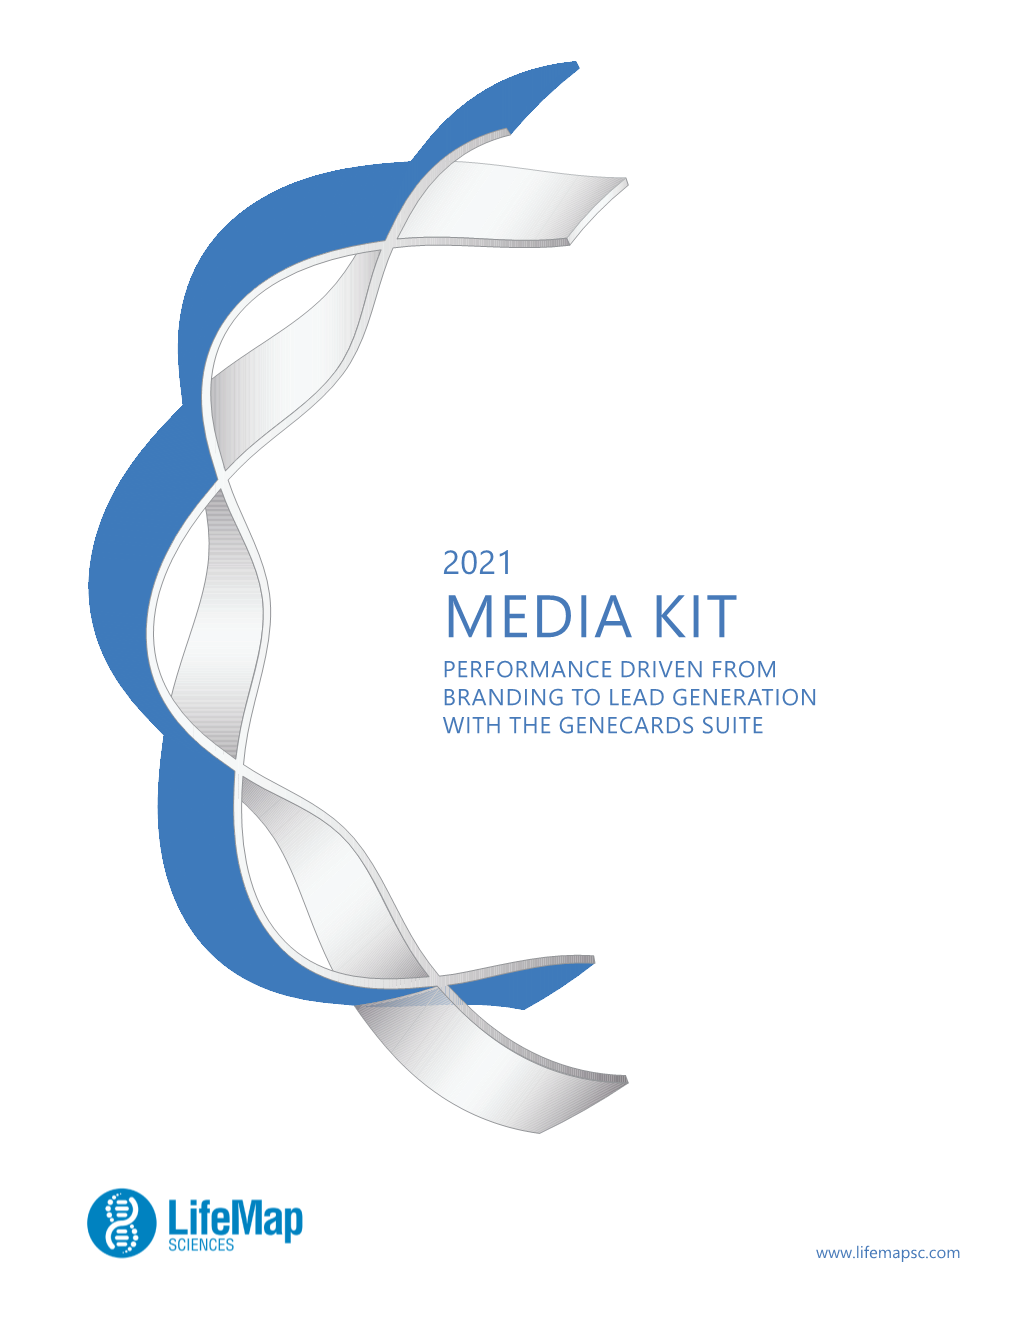 Media Kit Performance Driven from Branding to Lead Generation with the Genecards Suite